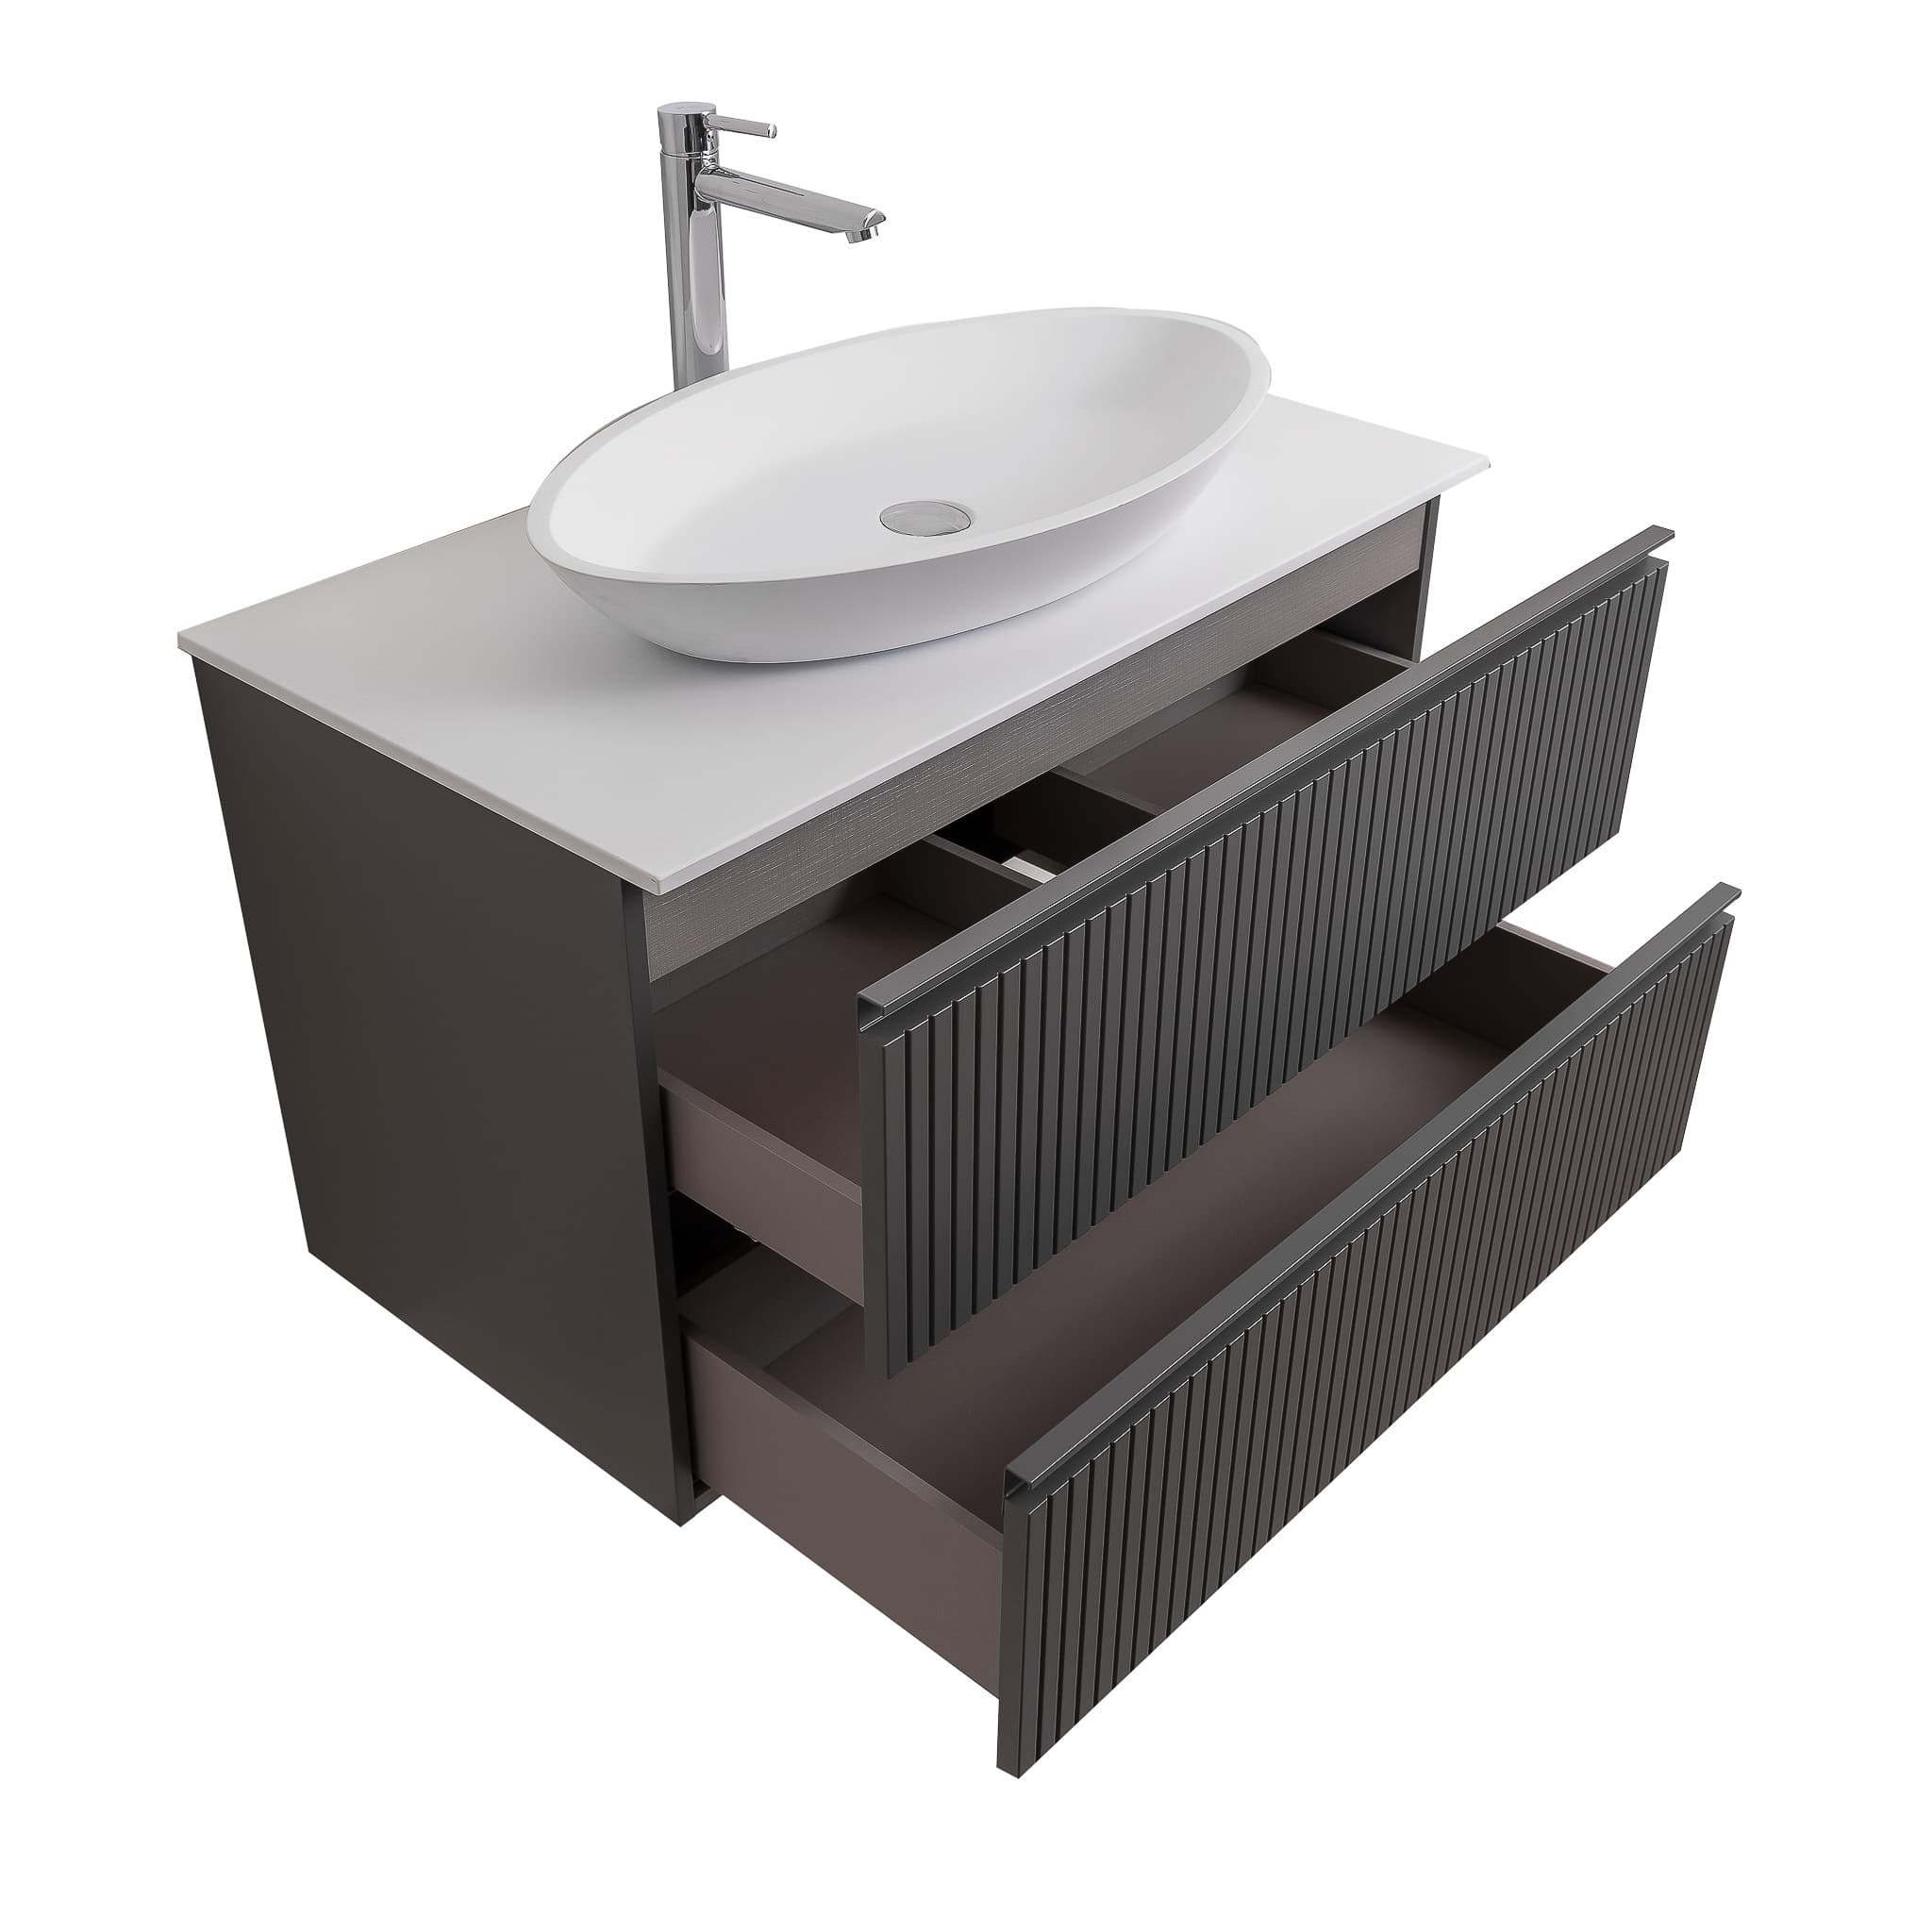 Ares 39.5 Matte Grey Cabinet, Solid Surface Flat White Counter And Oval Solid Surface White Basin 1305, Wall Mounted Modern Vanity Set